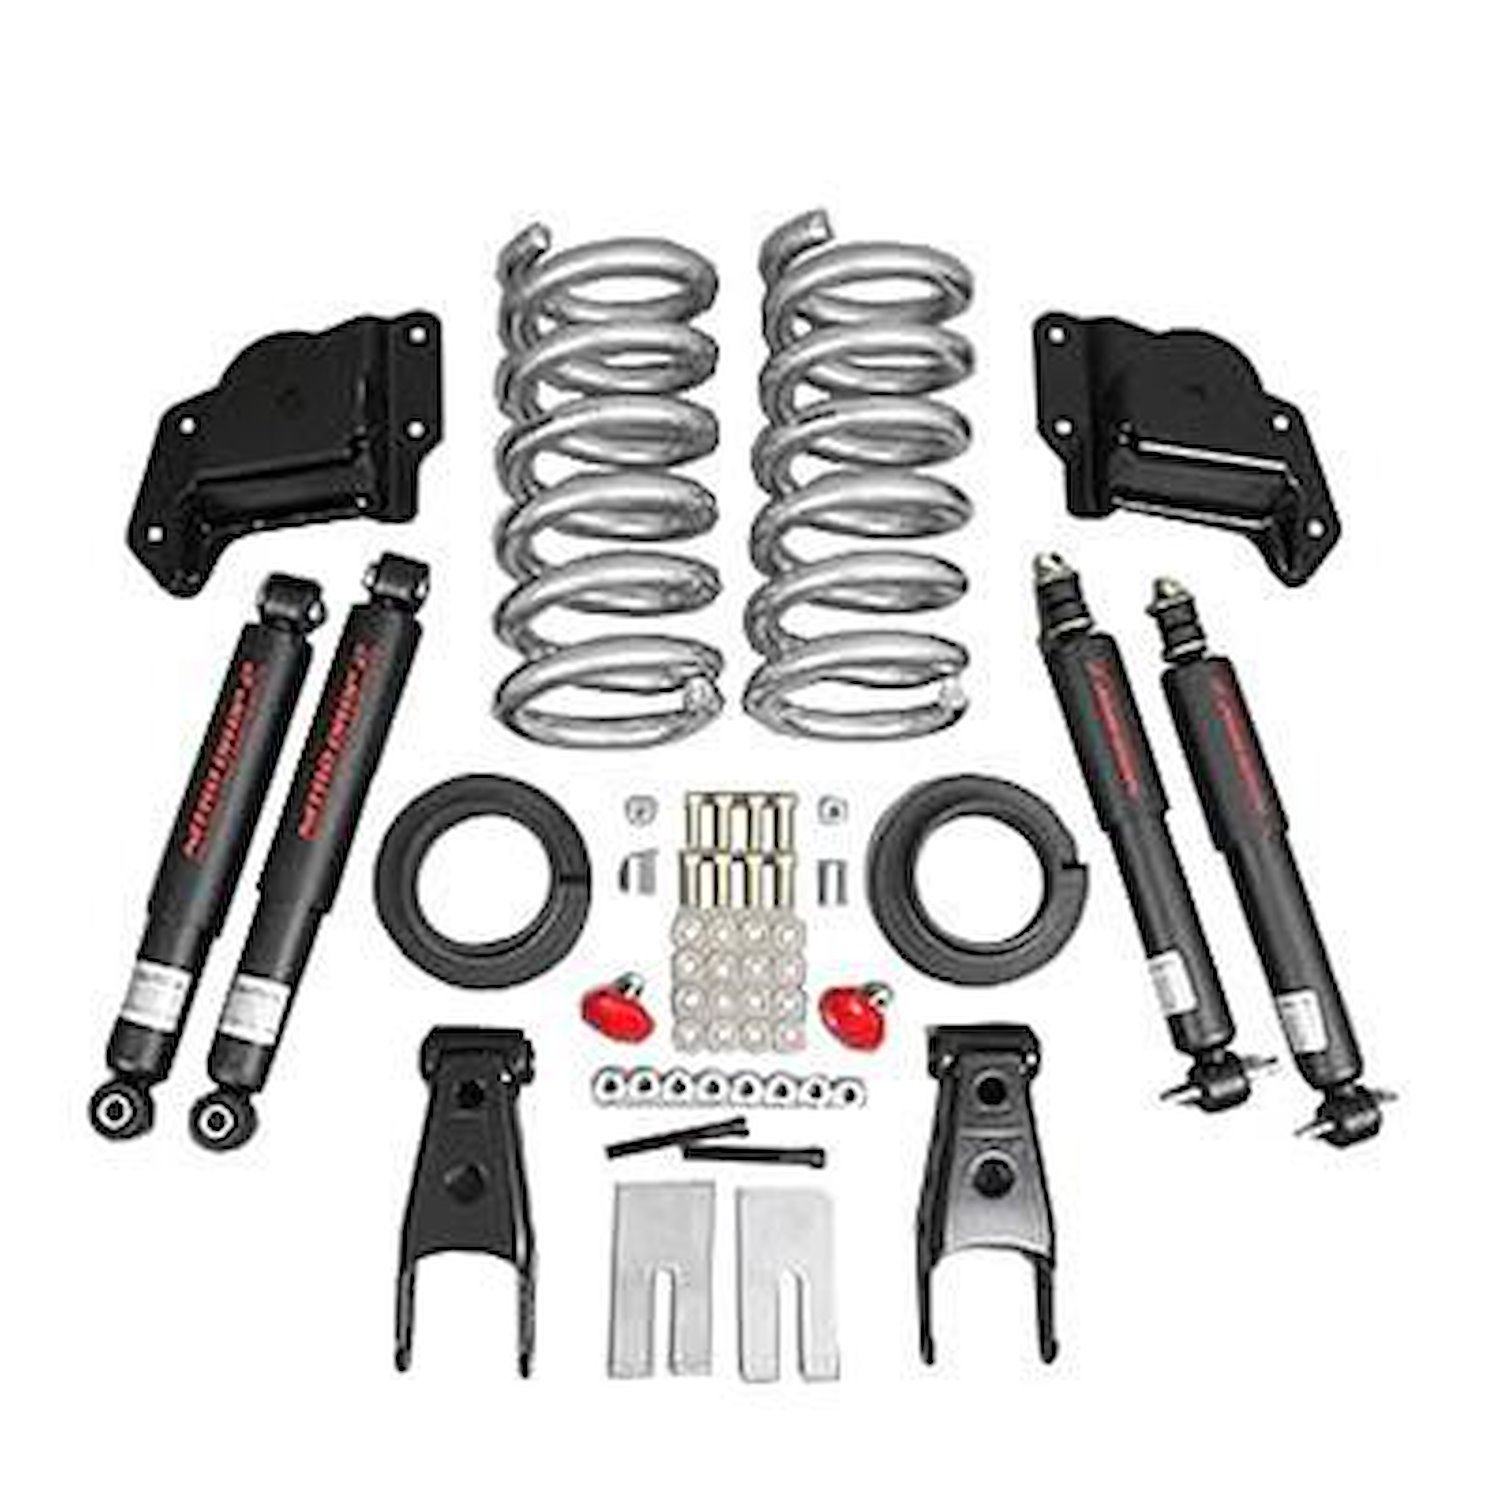 Complete Lowering Kit for 1995-1998 Chevy Suburban 2500